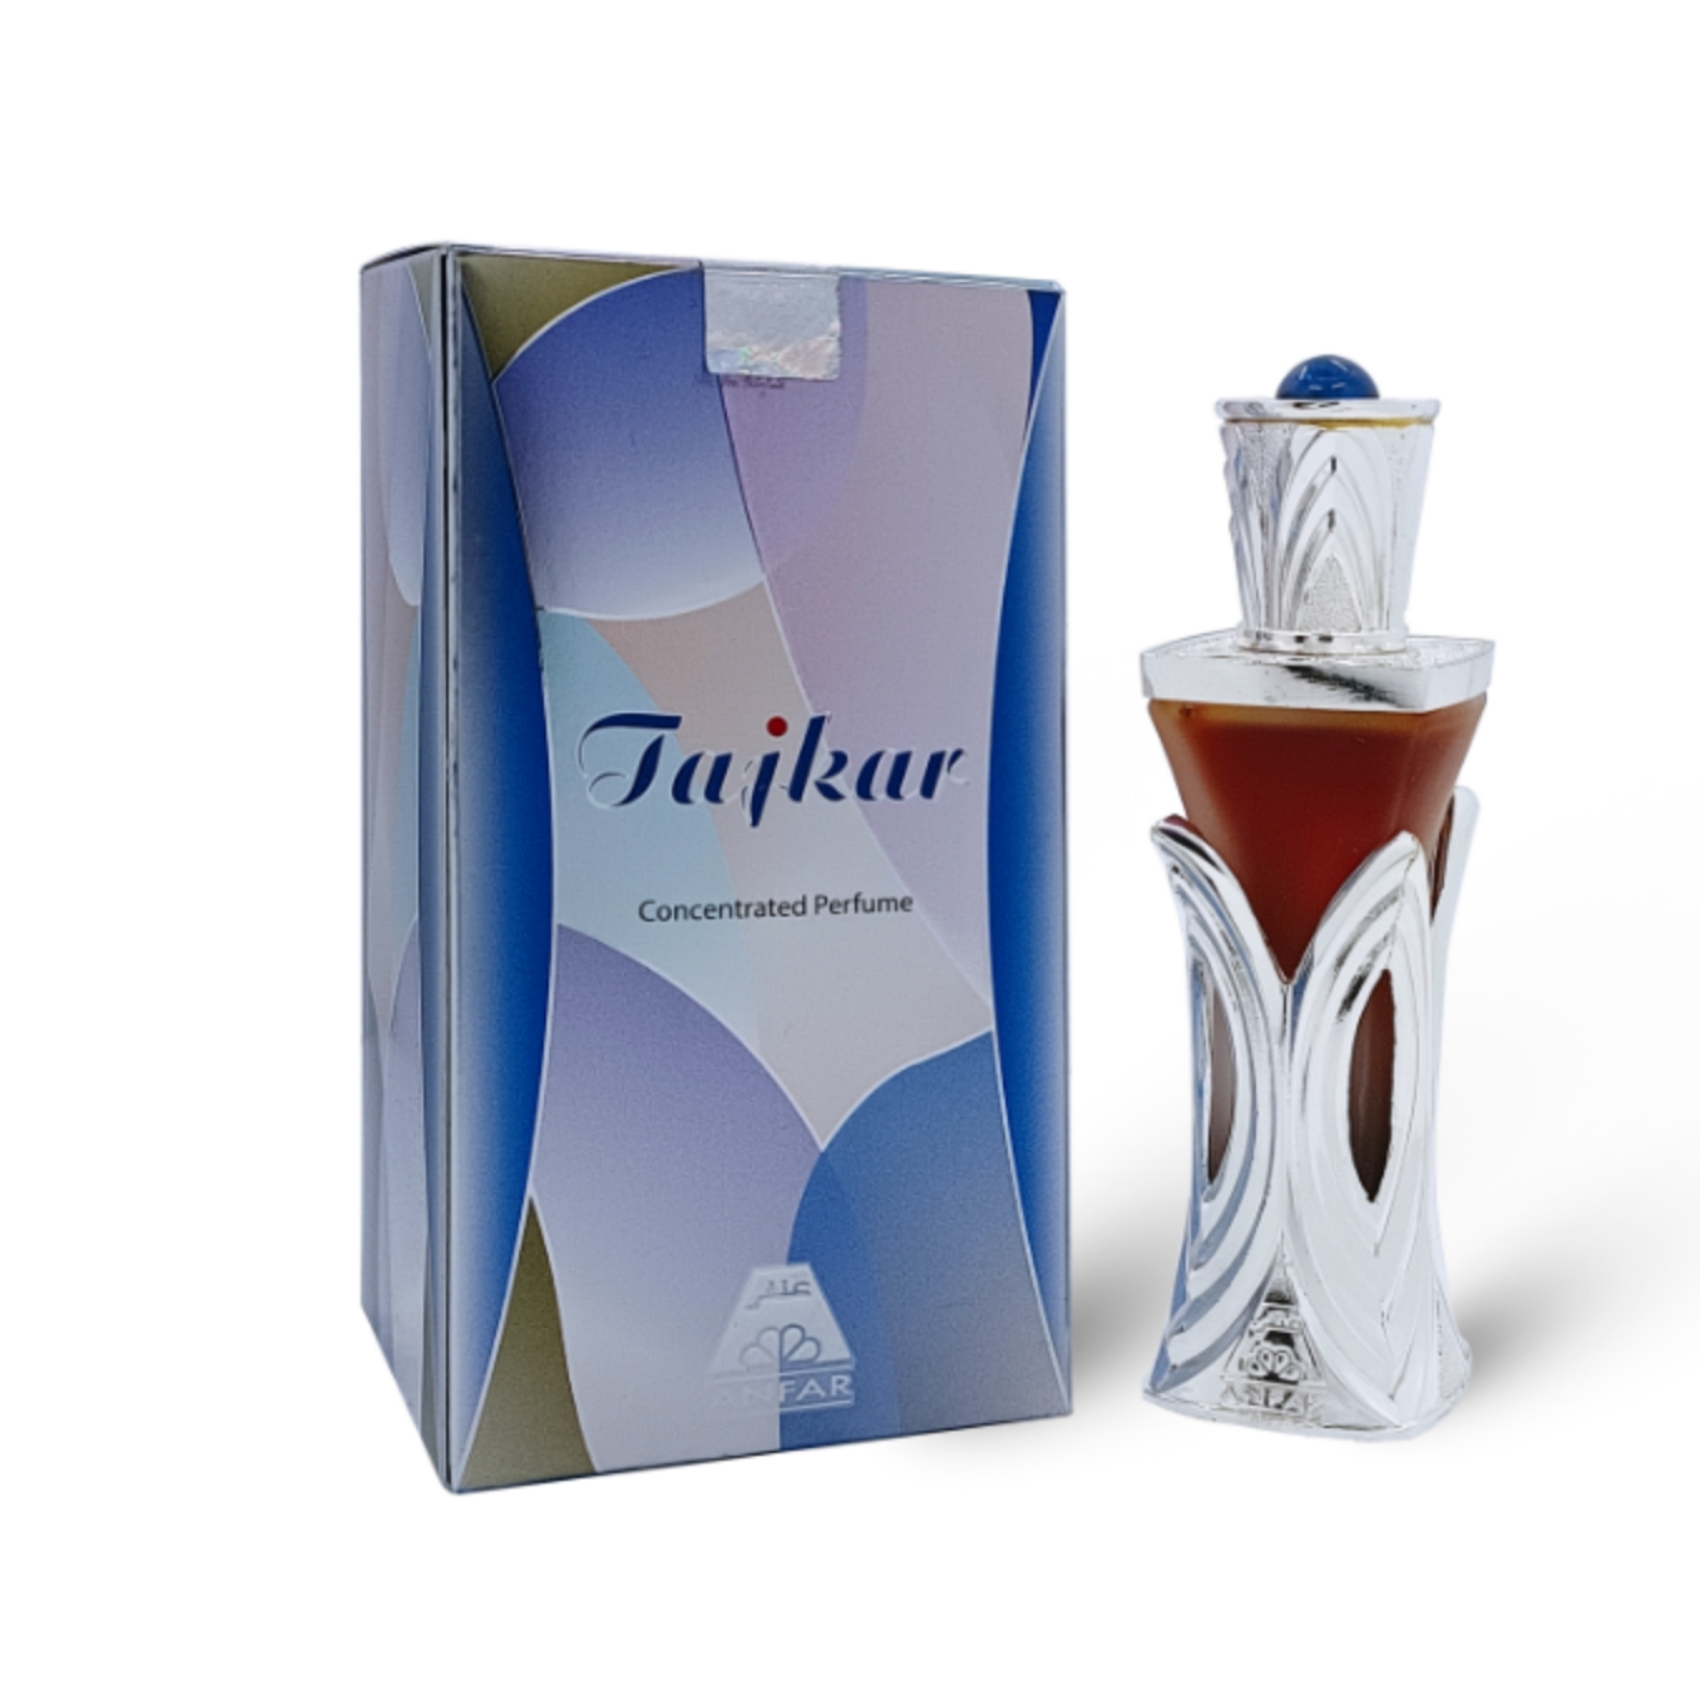 Tajkar Oud Concentrated Perfume Free From Alcohol 17ml For Men & Women - Made In Dubai